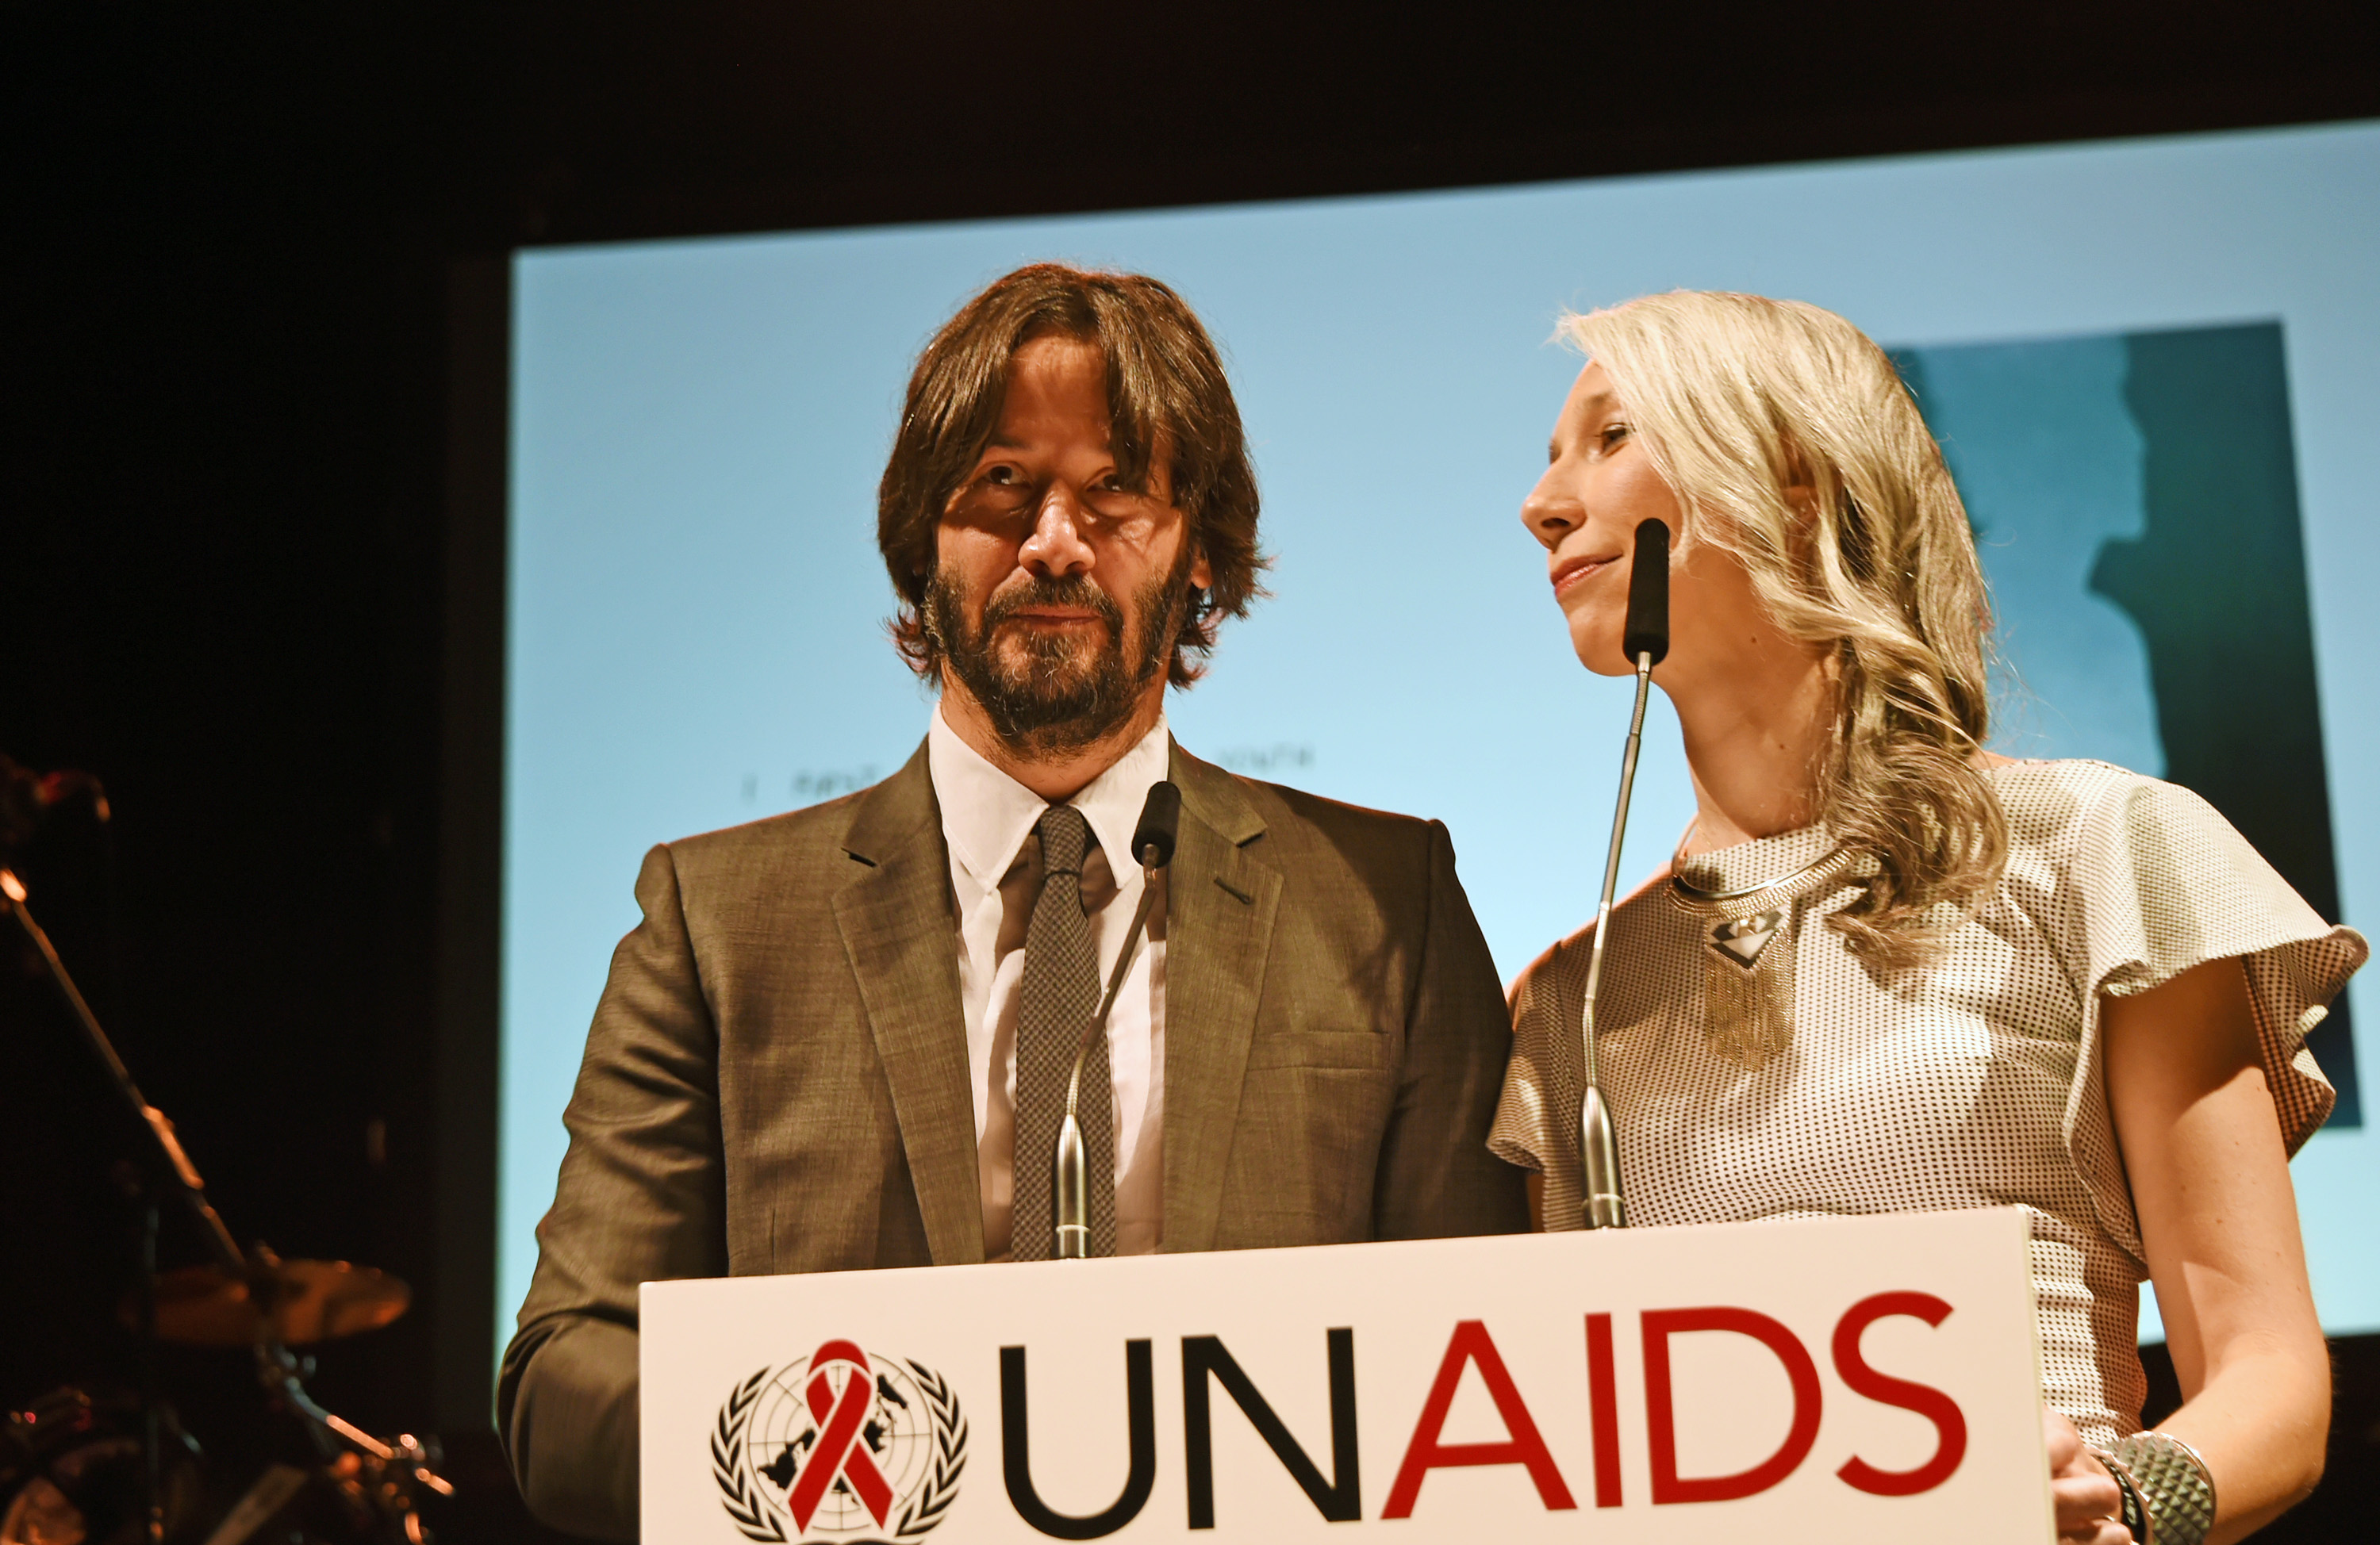 Alexandra Grant and Keanu Reeves at the UNAIDS Gala in Los Angeles in 2016 | Source: Getty Images